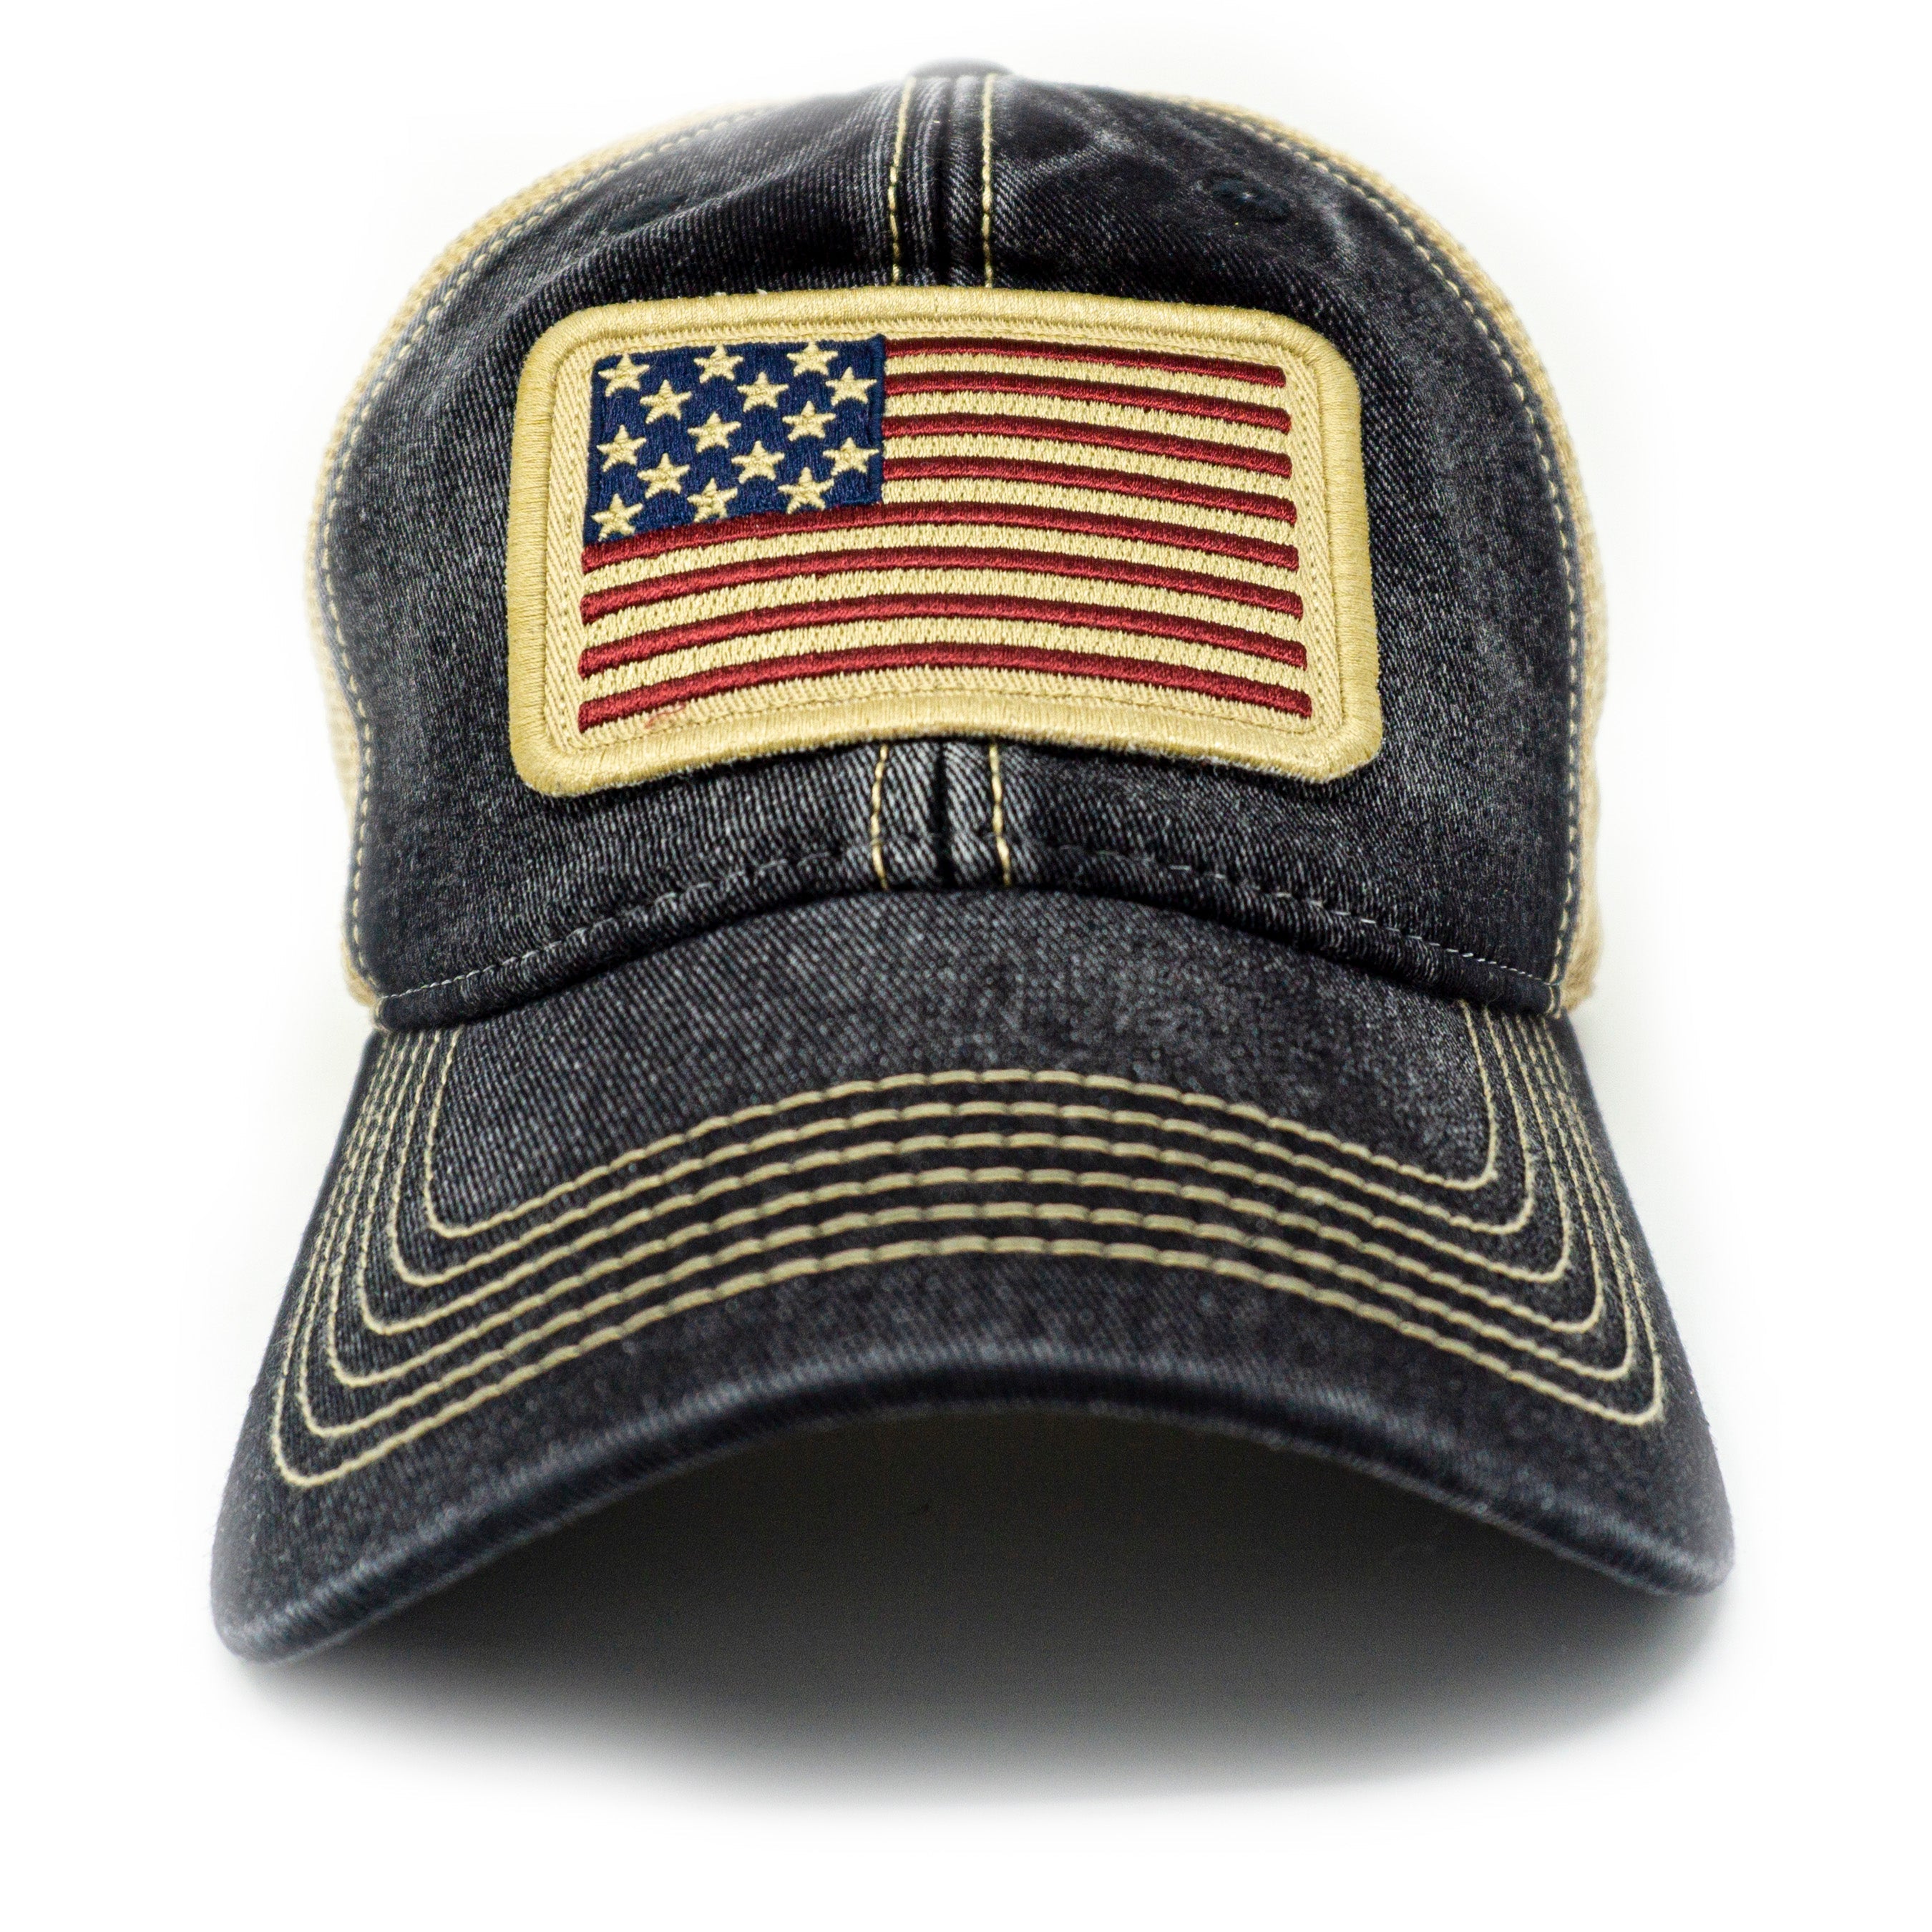 1812 USA Flag Patch Trucker Hat